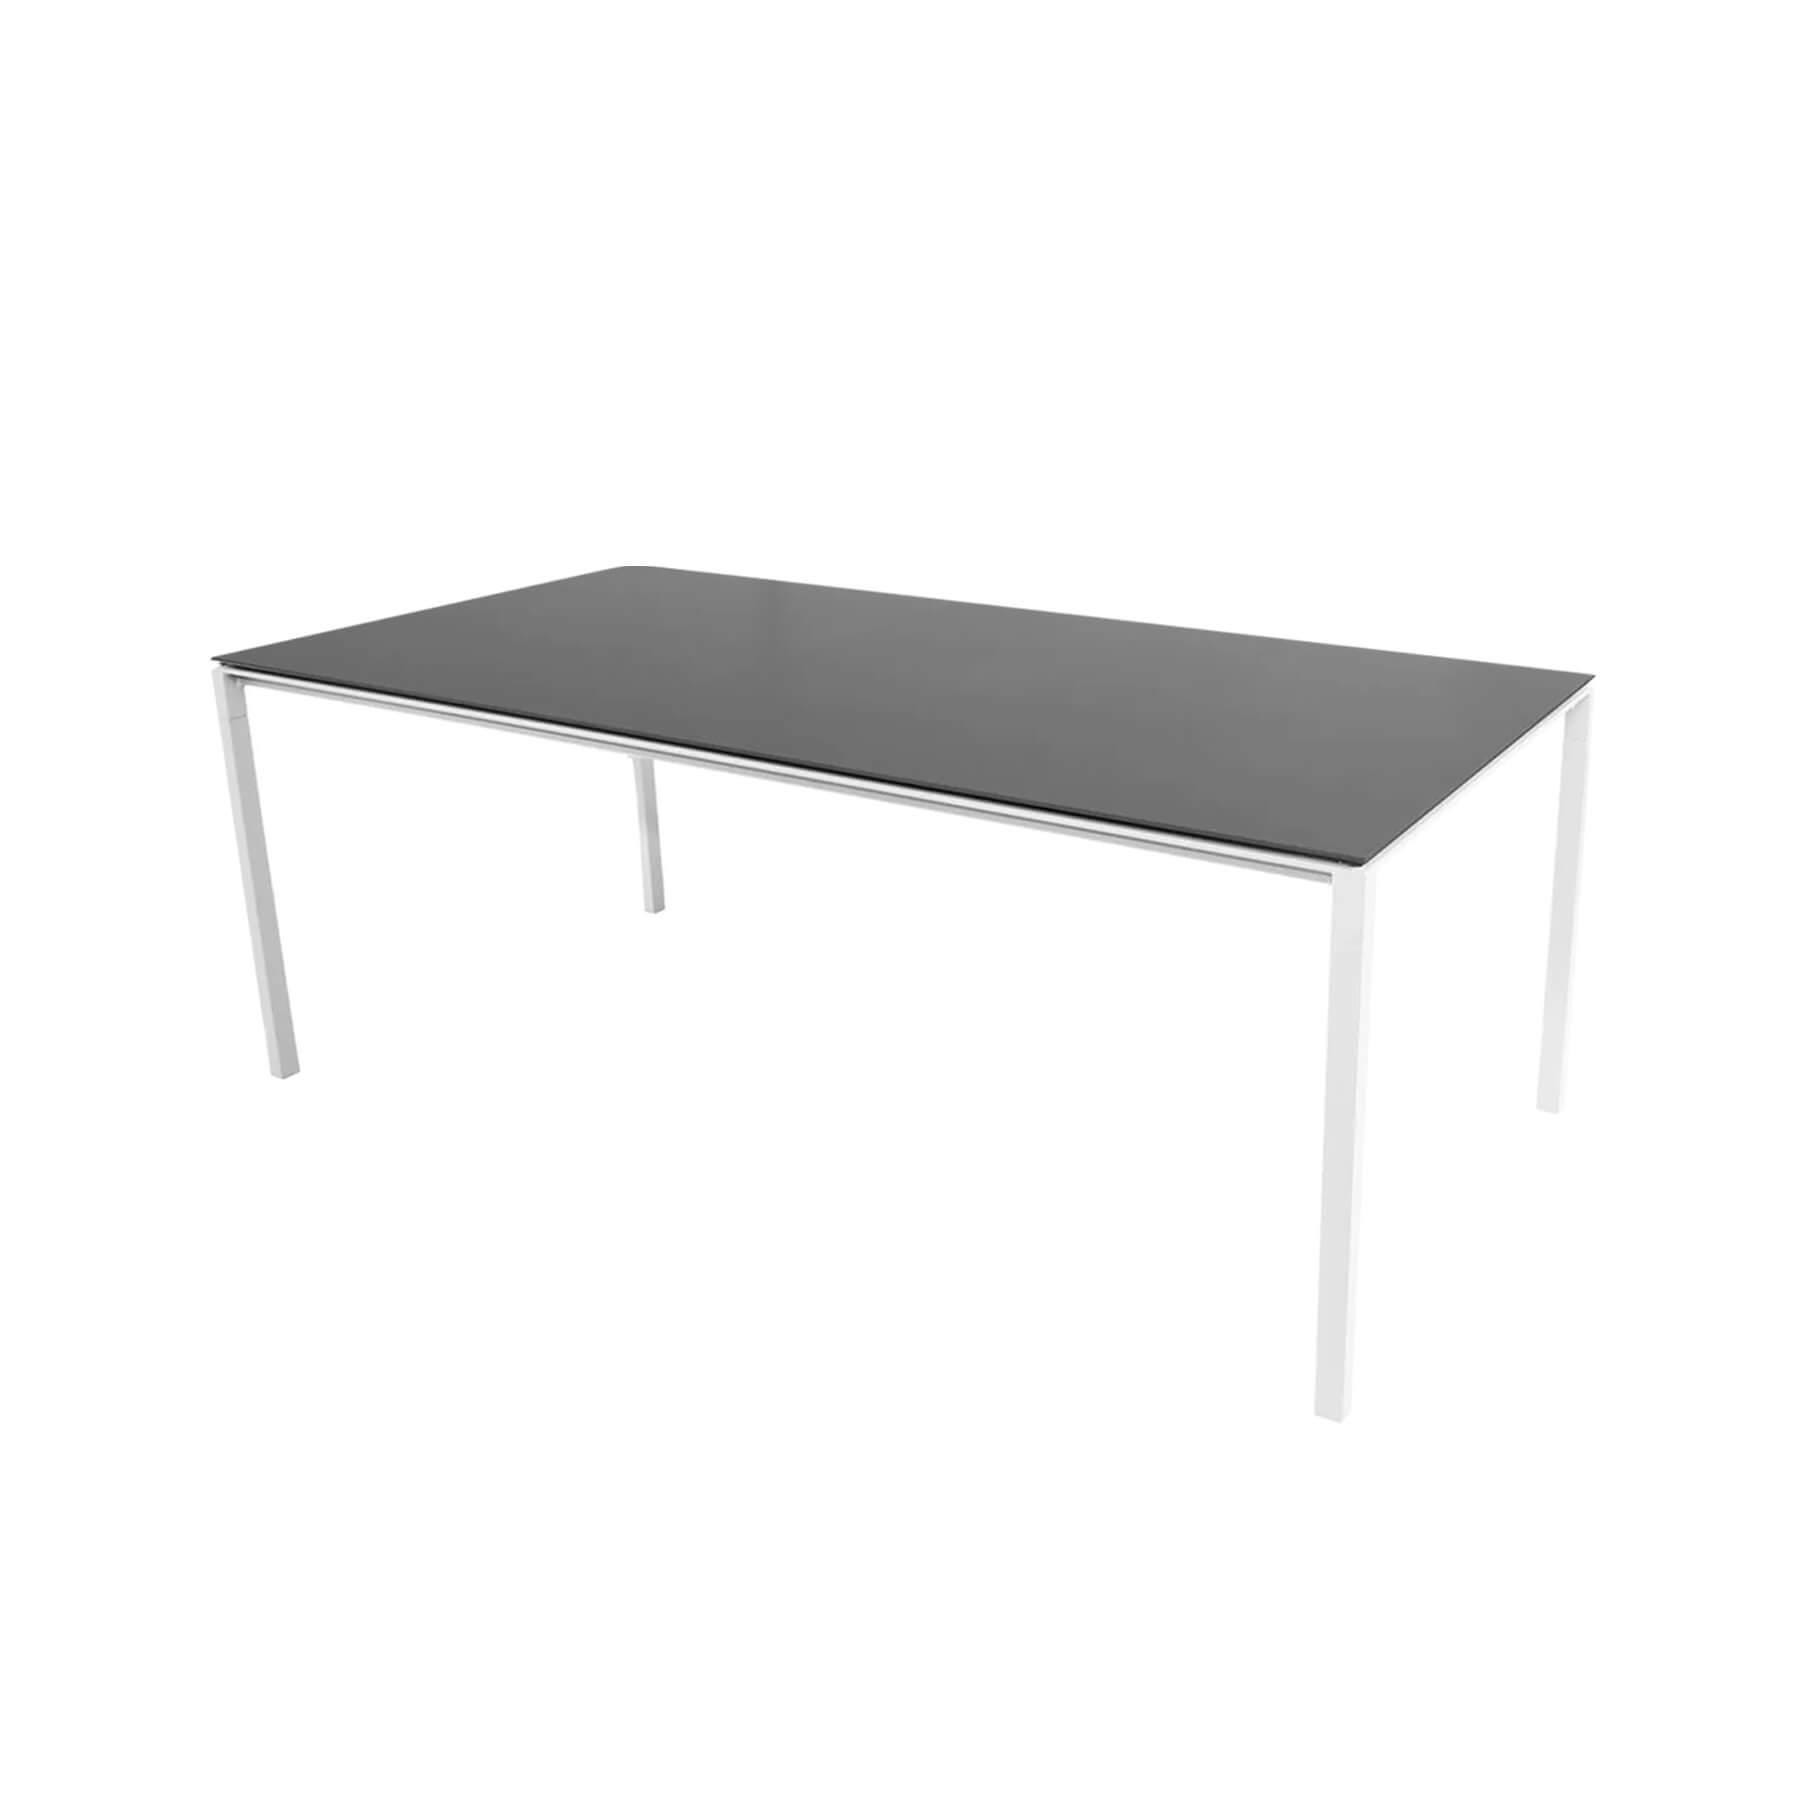 Caneline Pure Outdoor Dining Table Large Ceramic Nero Top White Legs Grey